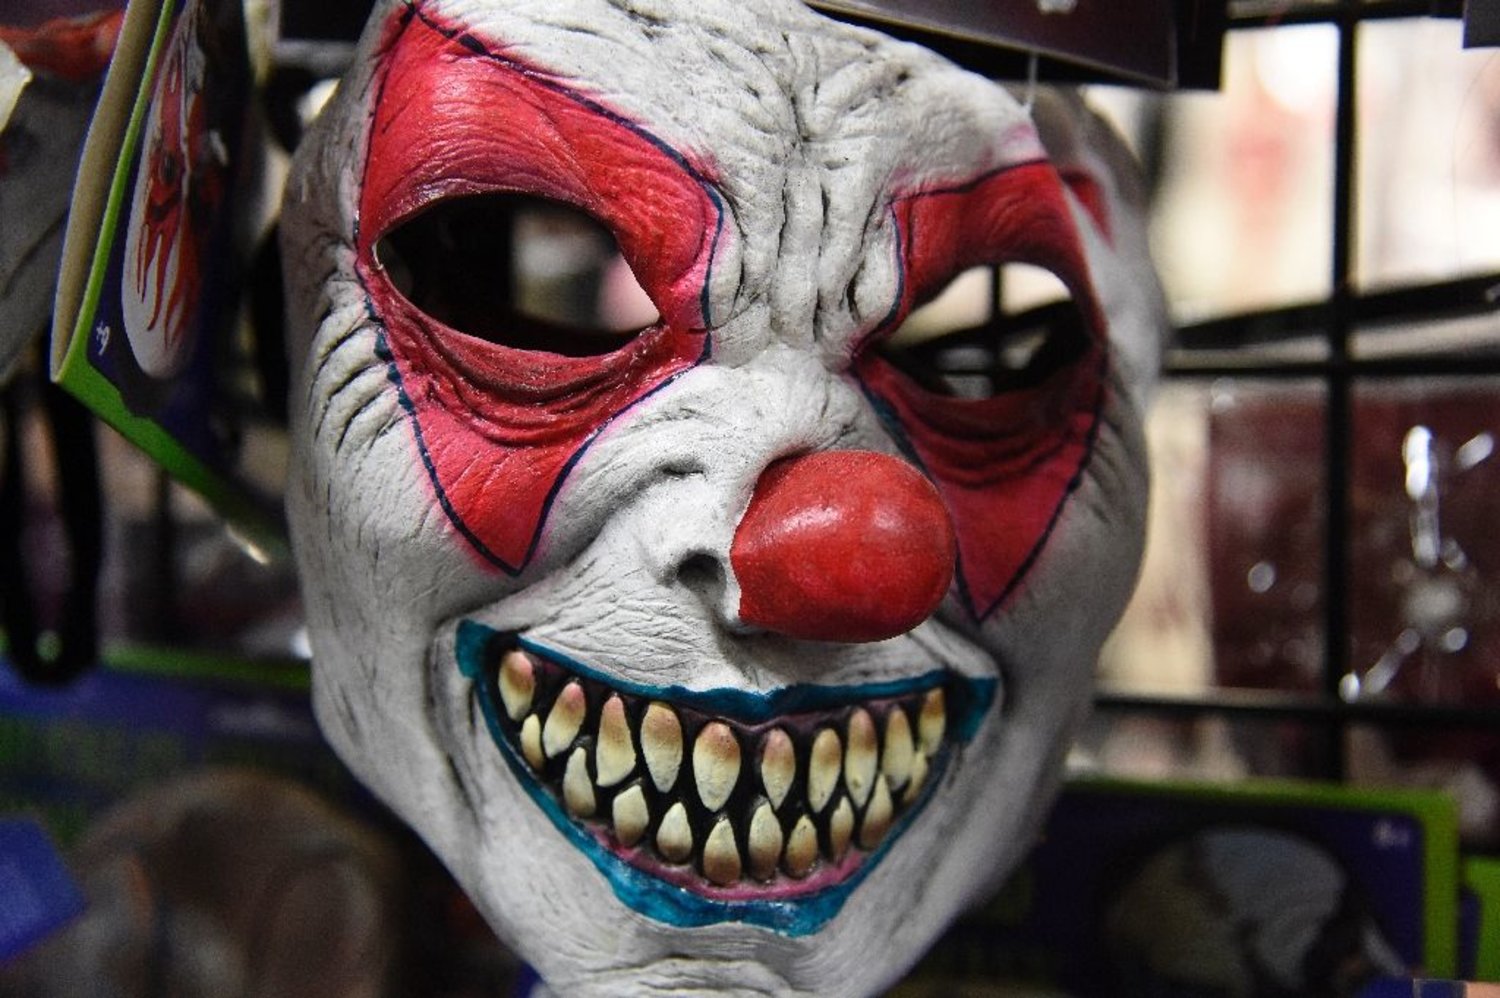 Israeli police are on the lookout for teenagers in clown masks after a group of them struck fear among Israelis. (AFP)